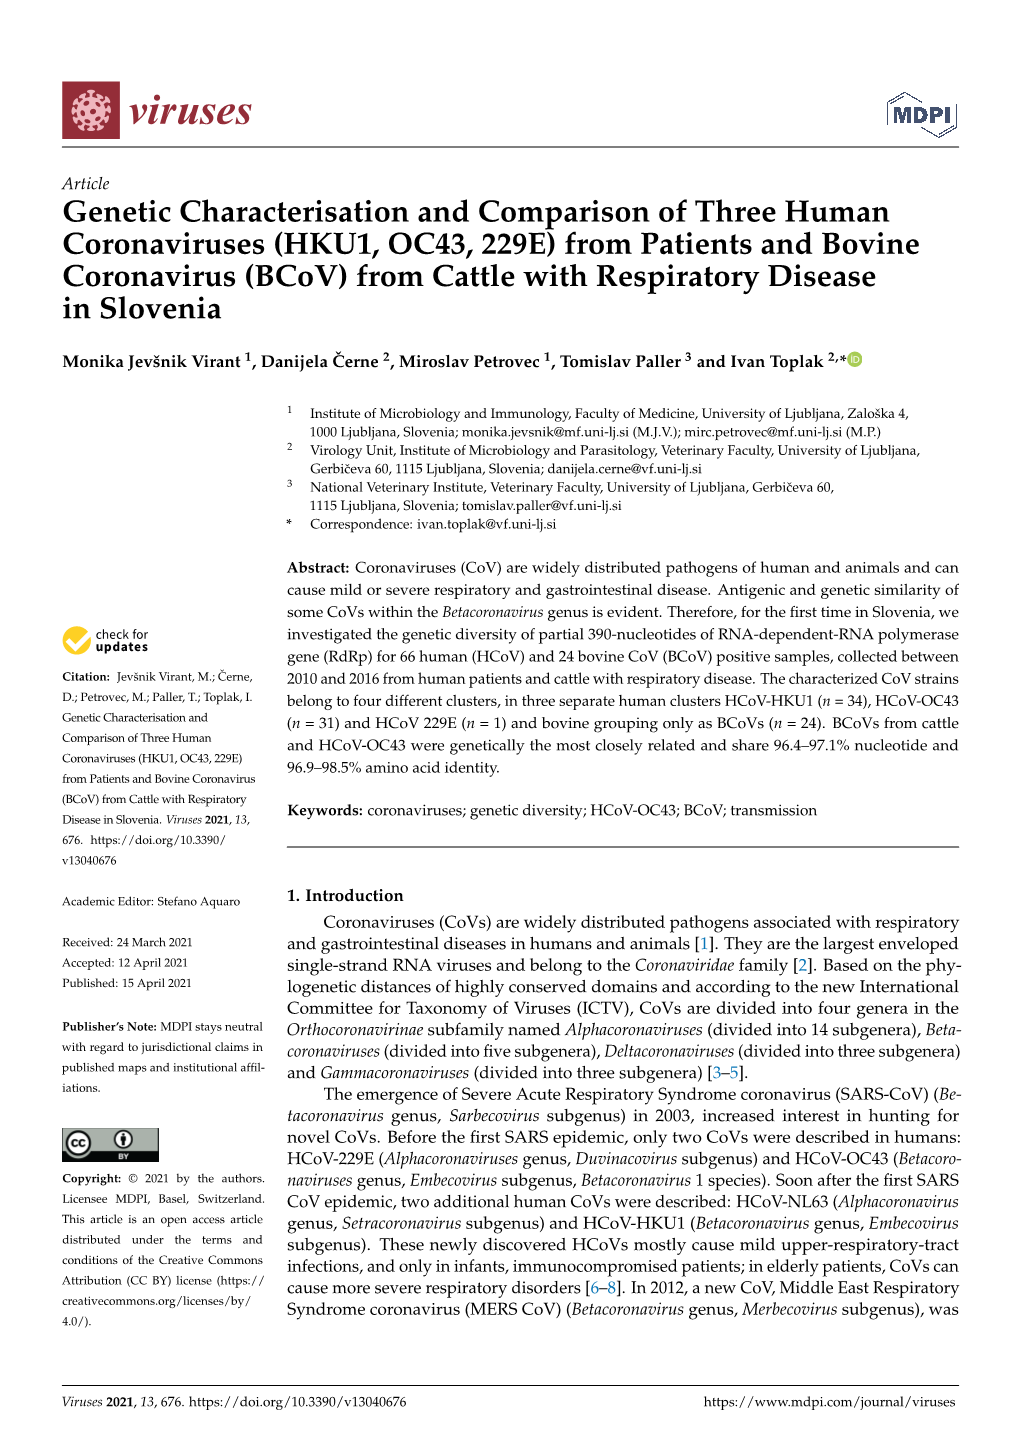 (HKU1, OC43, 229E) from Patients and Bovine Coronavirus (Bcov) from Cattle with Respiratory Disease in Slovenia